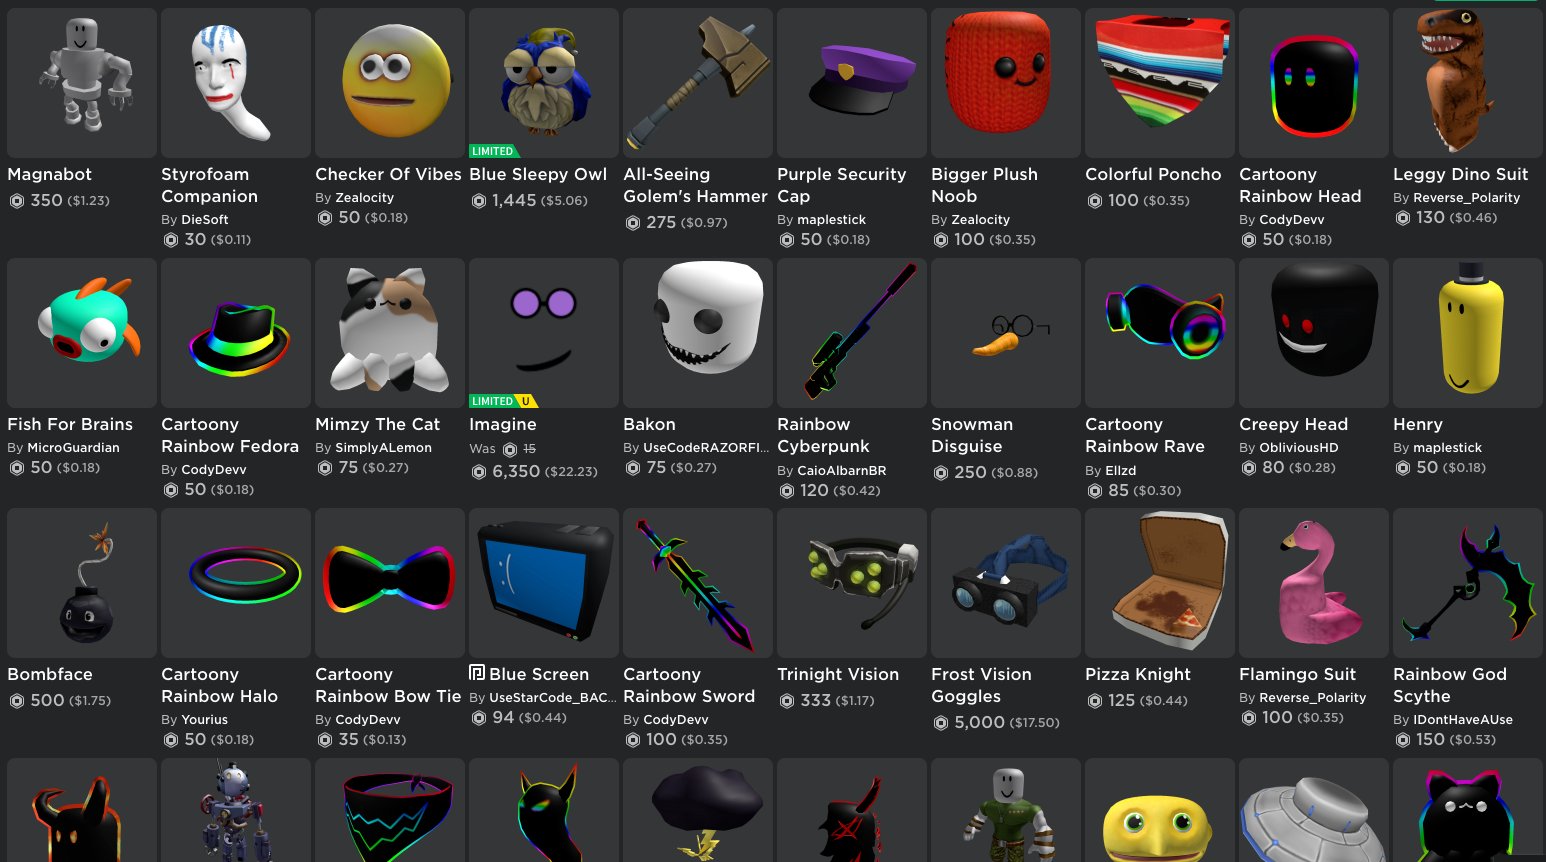 Bee Swarm Leaks On Twitter This New Recommended For You Category In The Roblox Avatar Shop Is Interesting - poncho 1 roblox